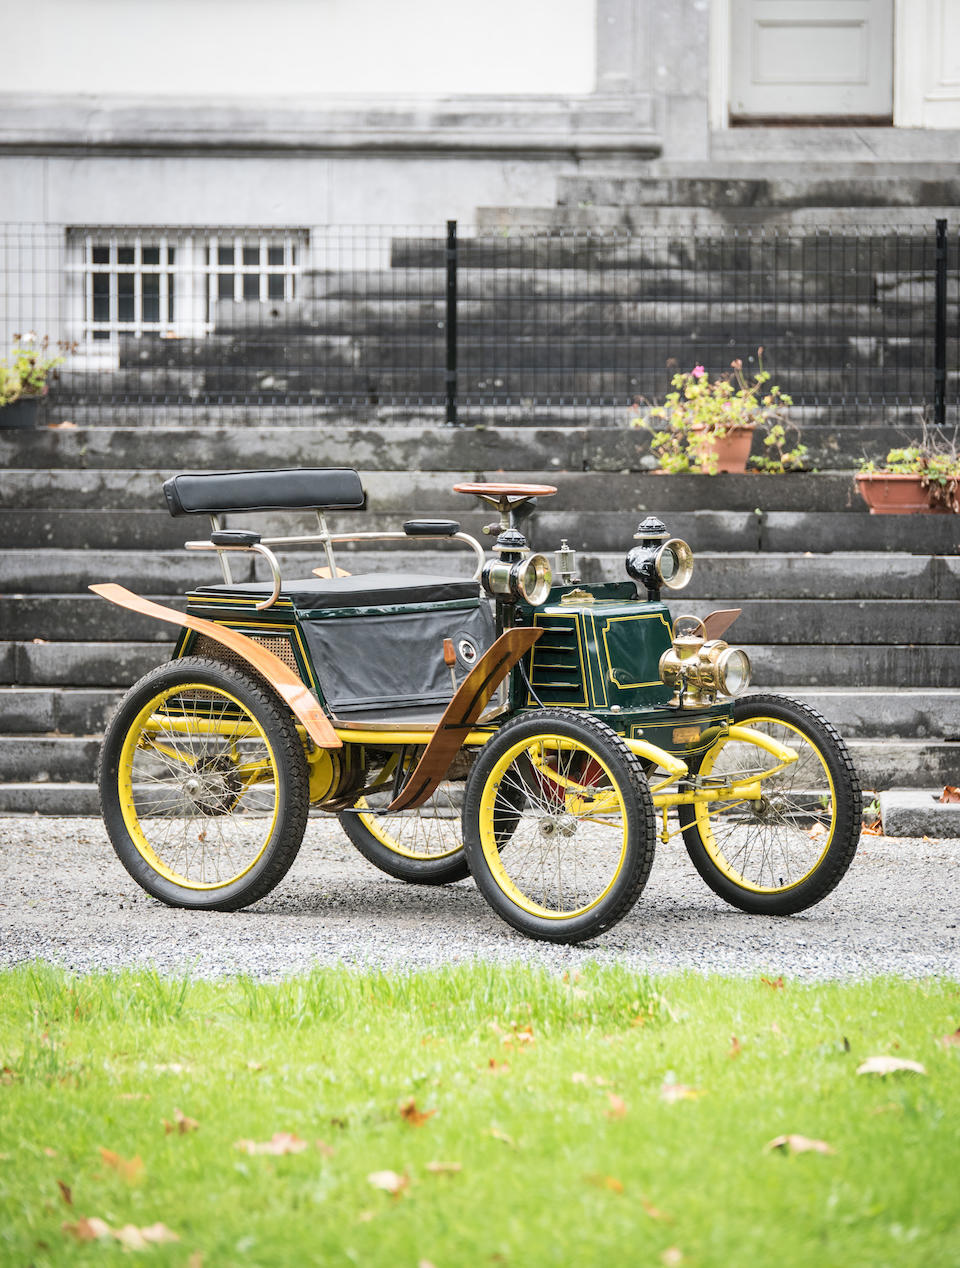 Property from a Private European Collection,c.1899  Vivinus 3&#189;hp Two-Seater Voiturette&#160;  Engine no. 85